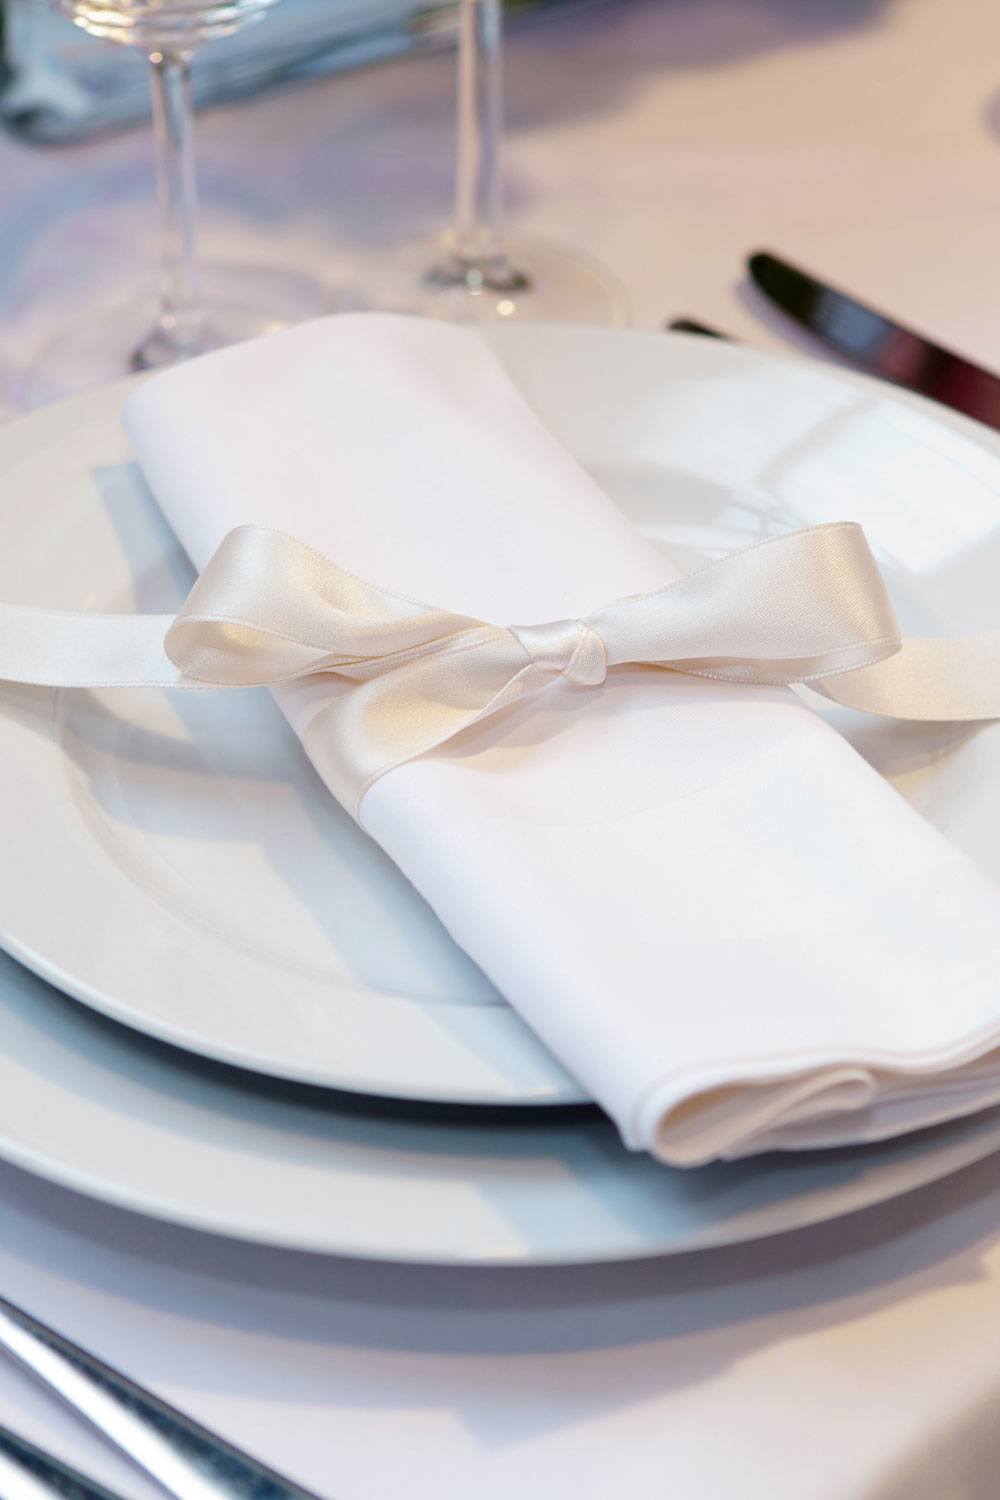 Small But Essential Element - Napkins